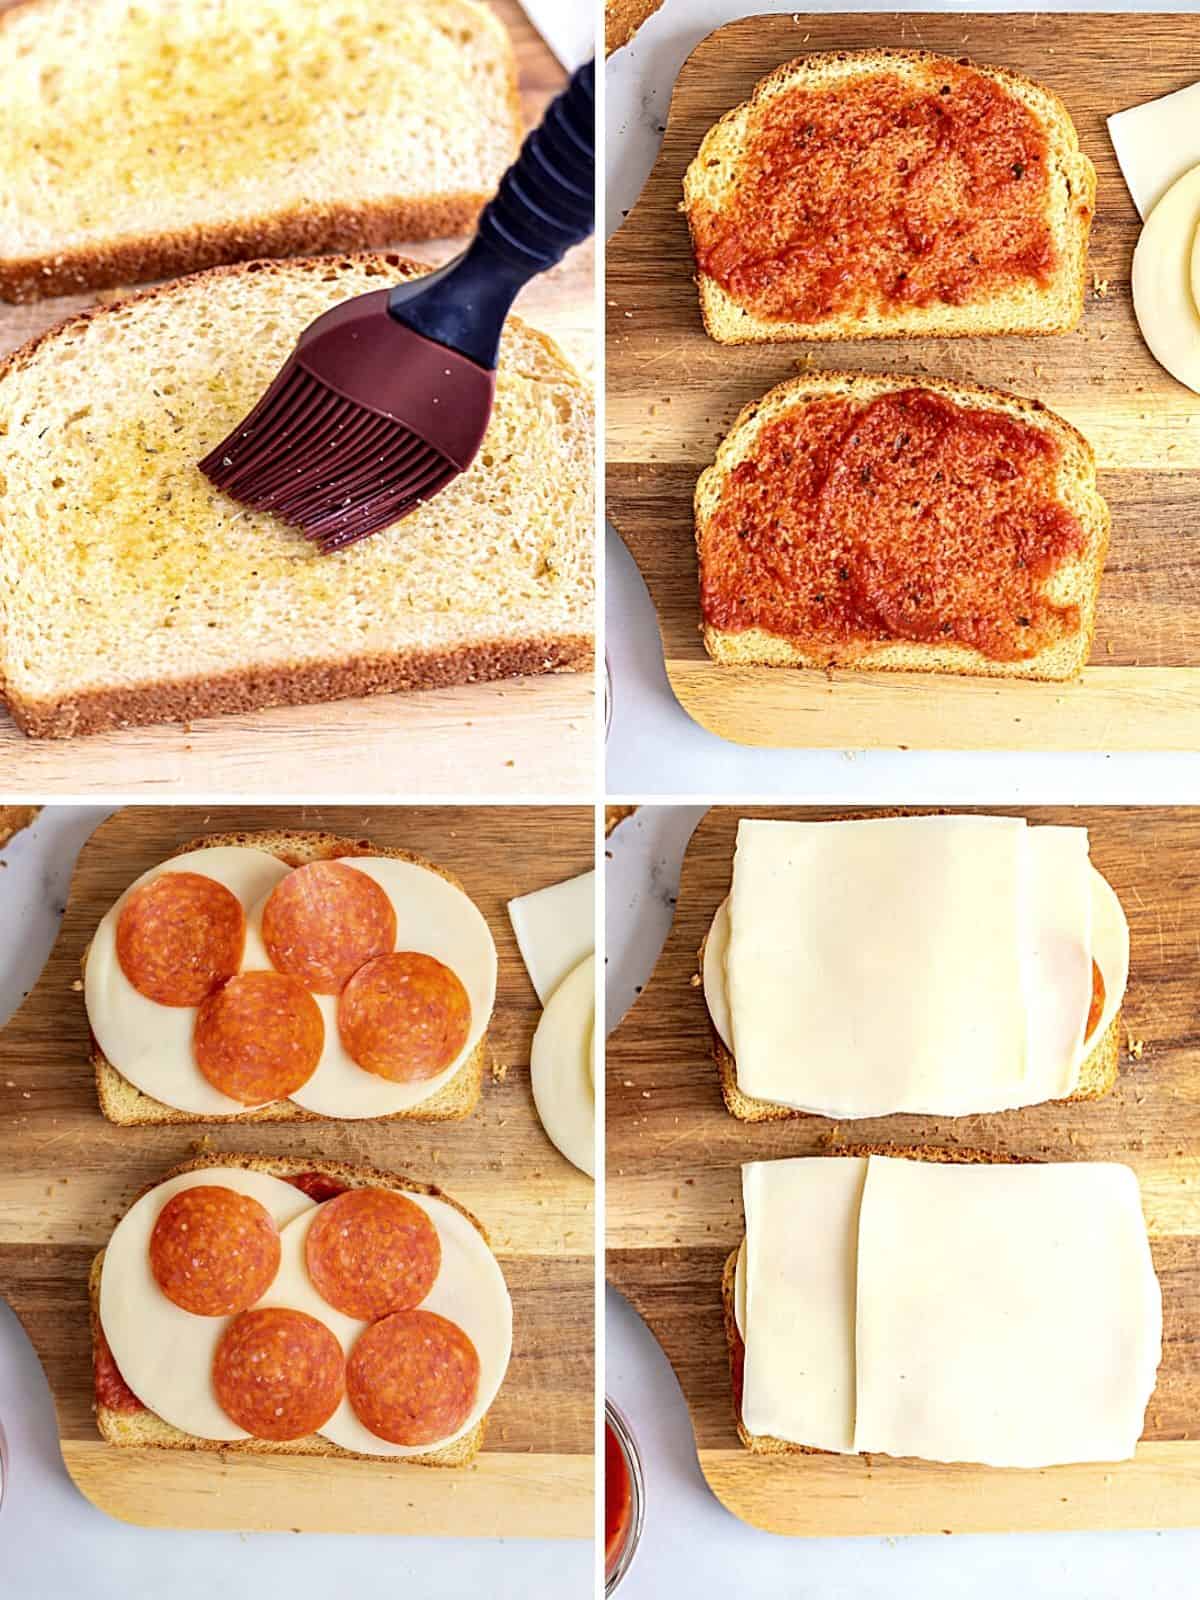 Collage of 4 pictures showing layering bread with cheese and pepperoni.